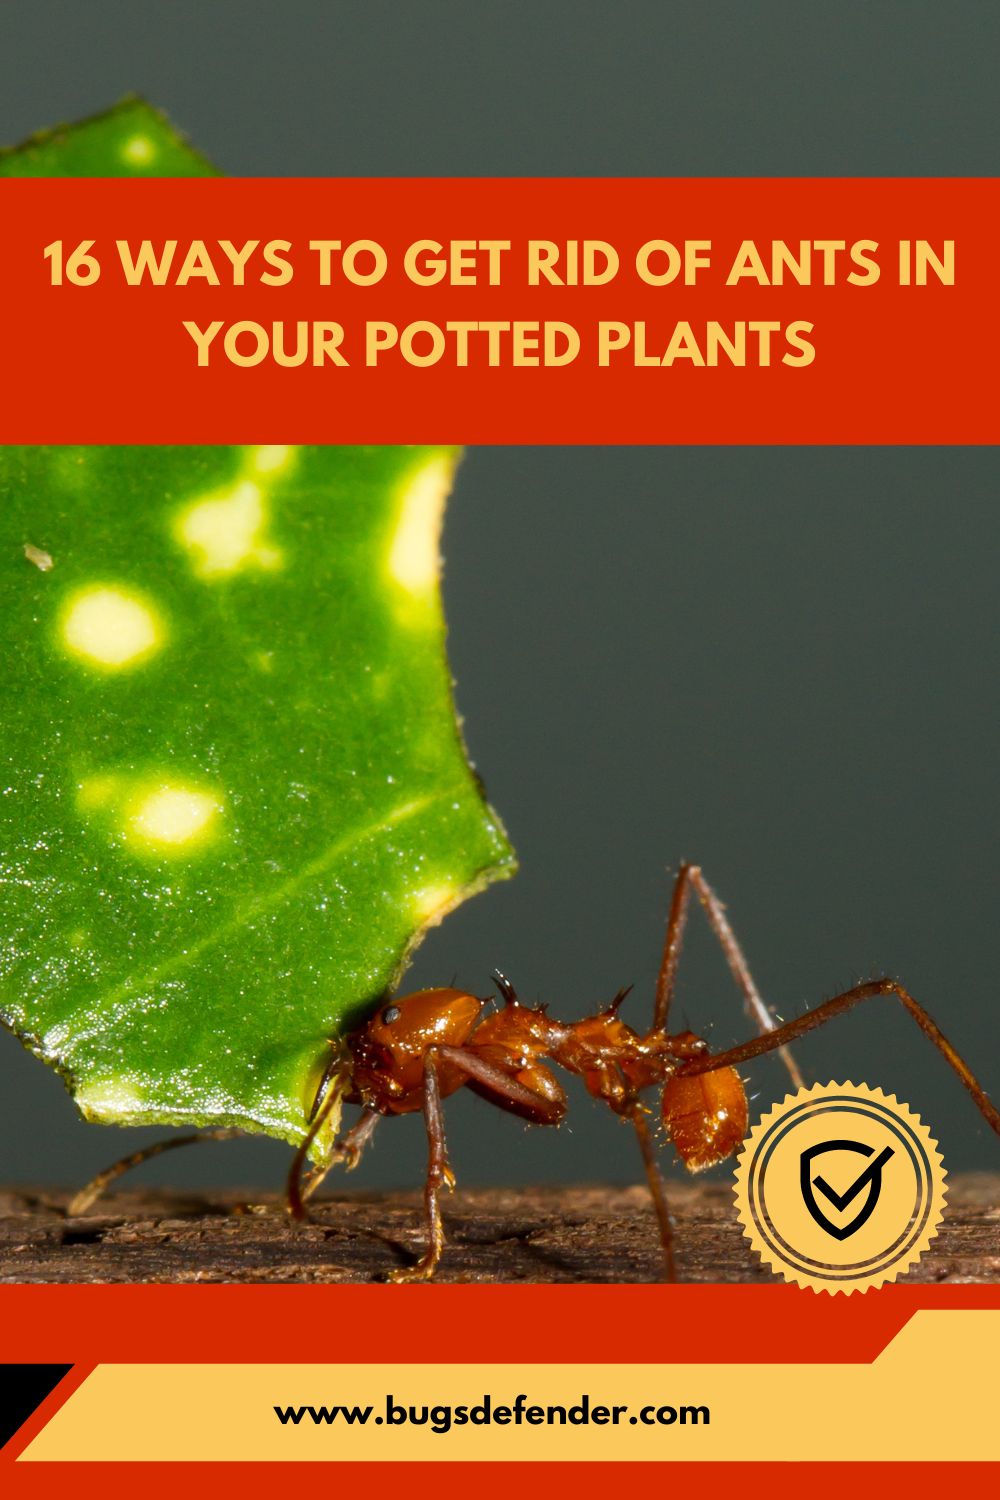 16 Ways to Get Rid of Ants in Your Potted Plants pin1